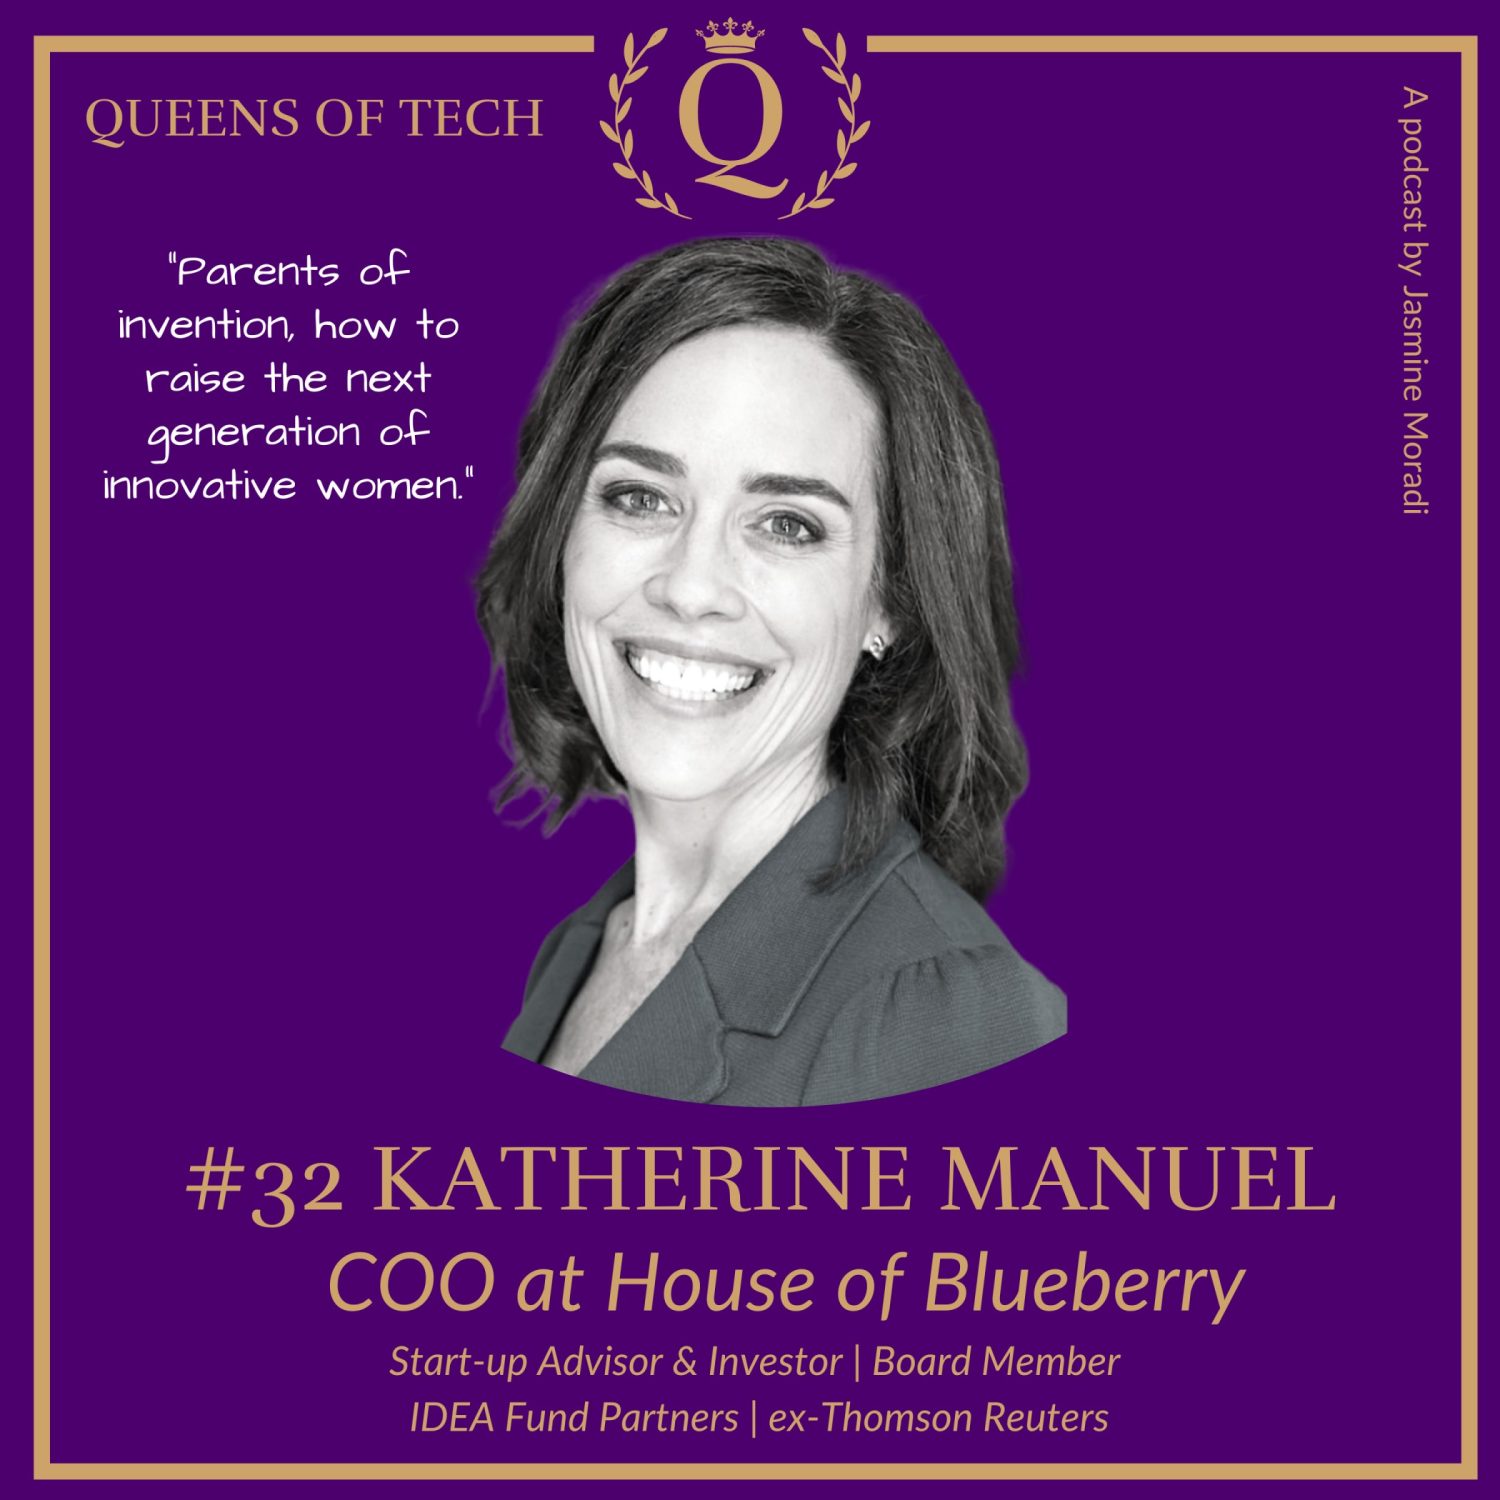 Katherine Manuel - COO at House of Blueberry -Queens of Tech-metaverse.jpg